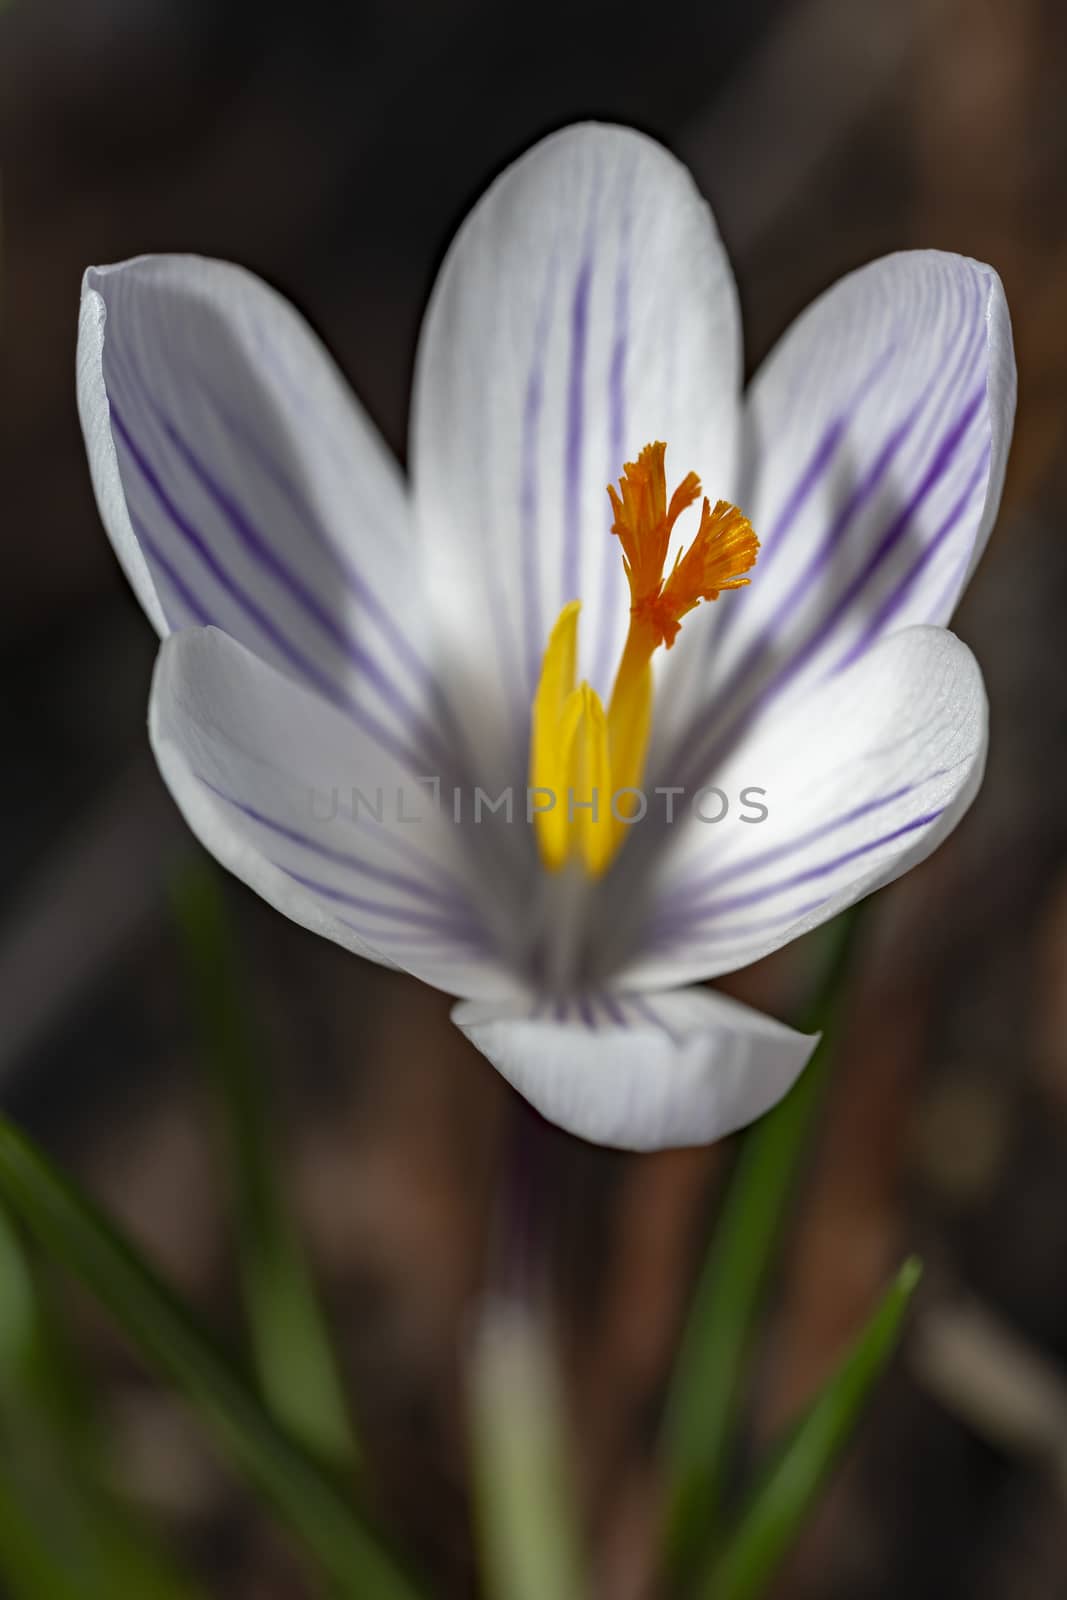 Closeup of a white and purple crocus flower against a blur soil color background by ankorlight